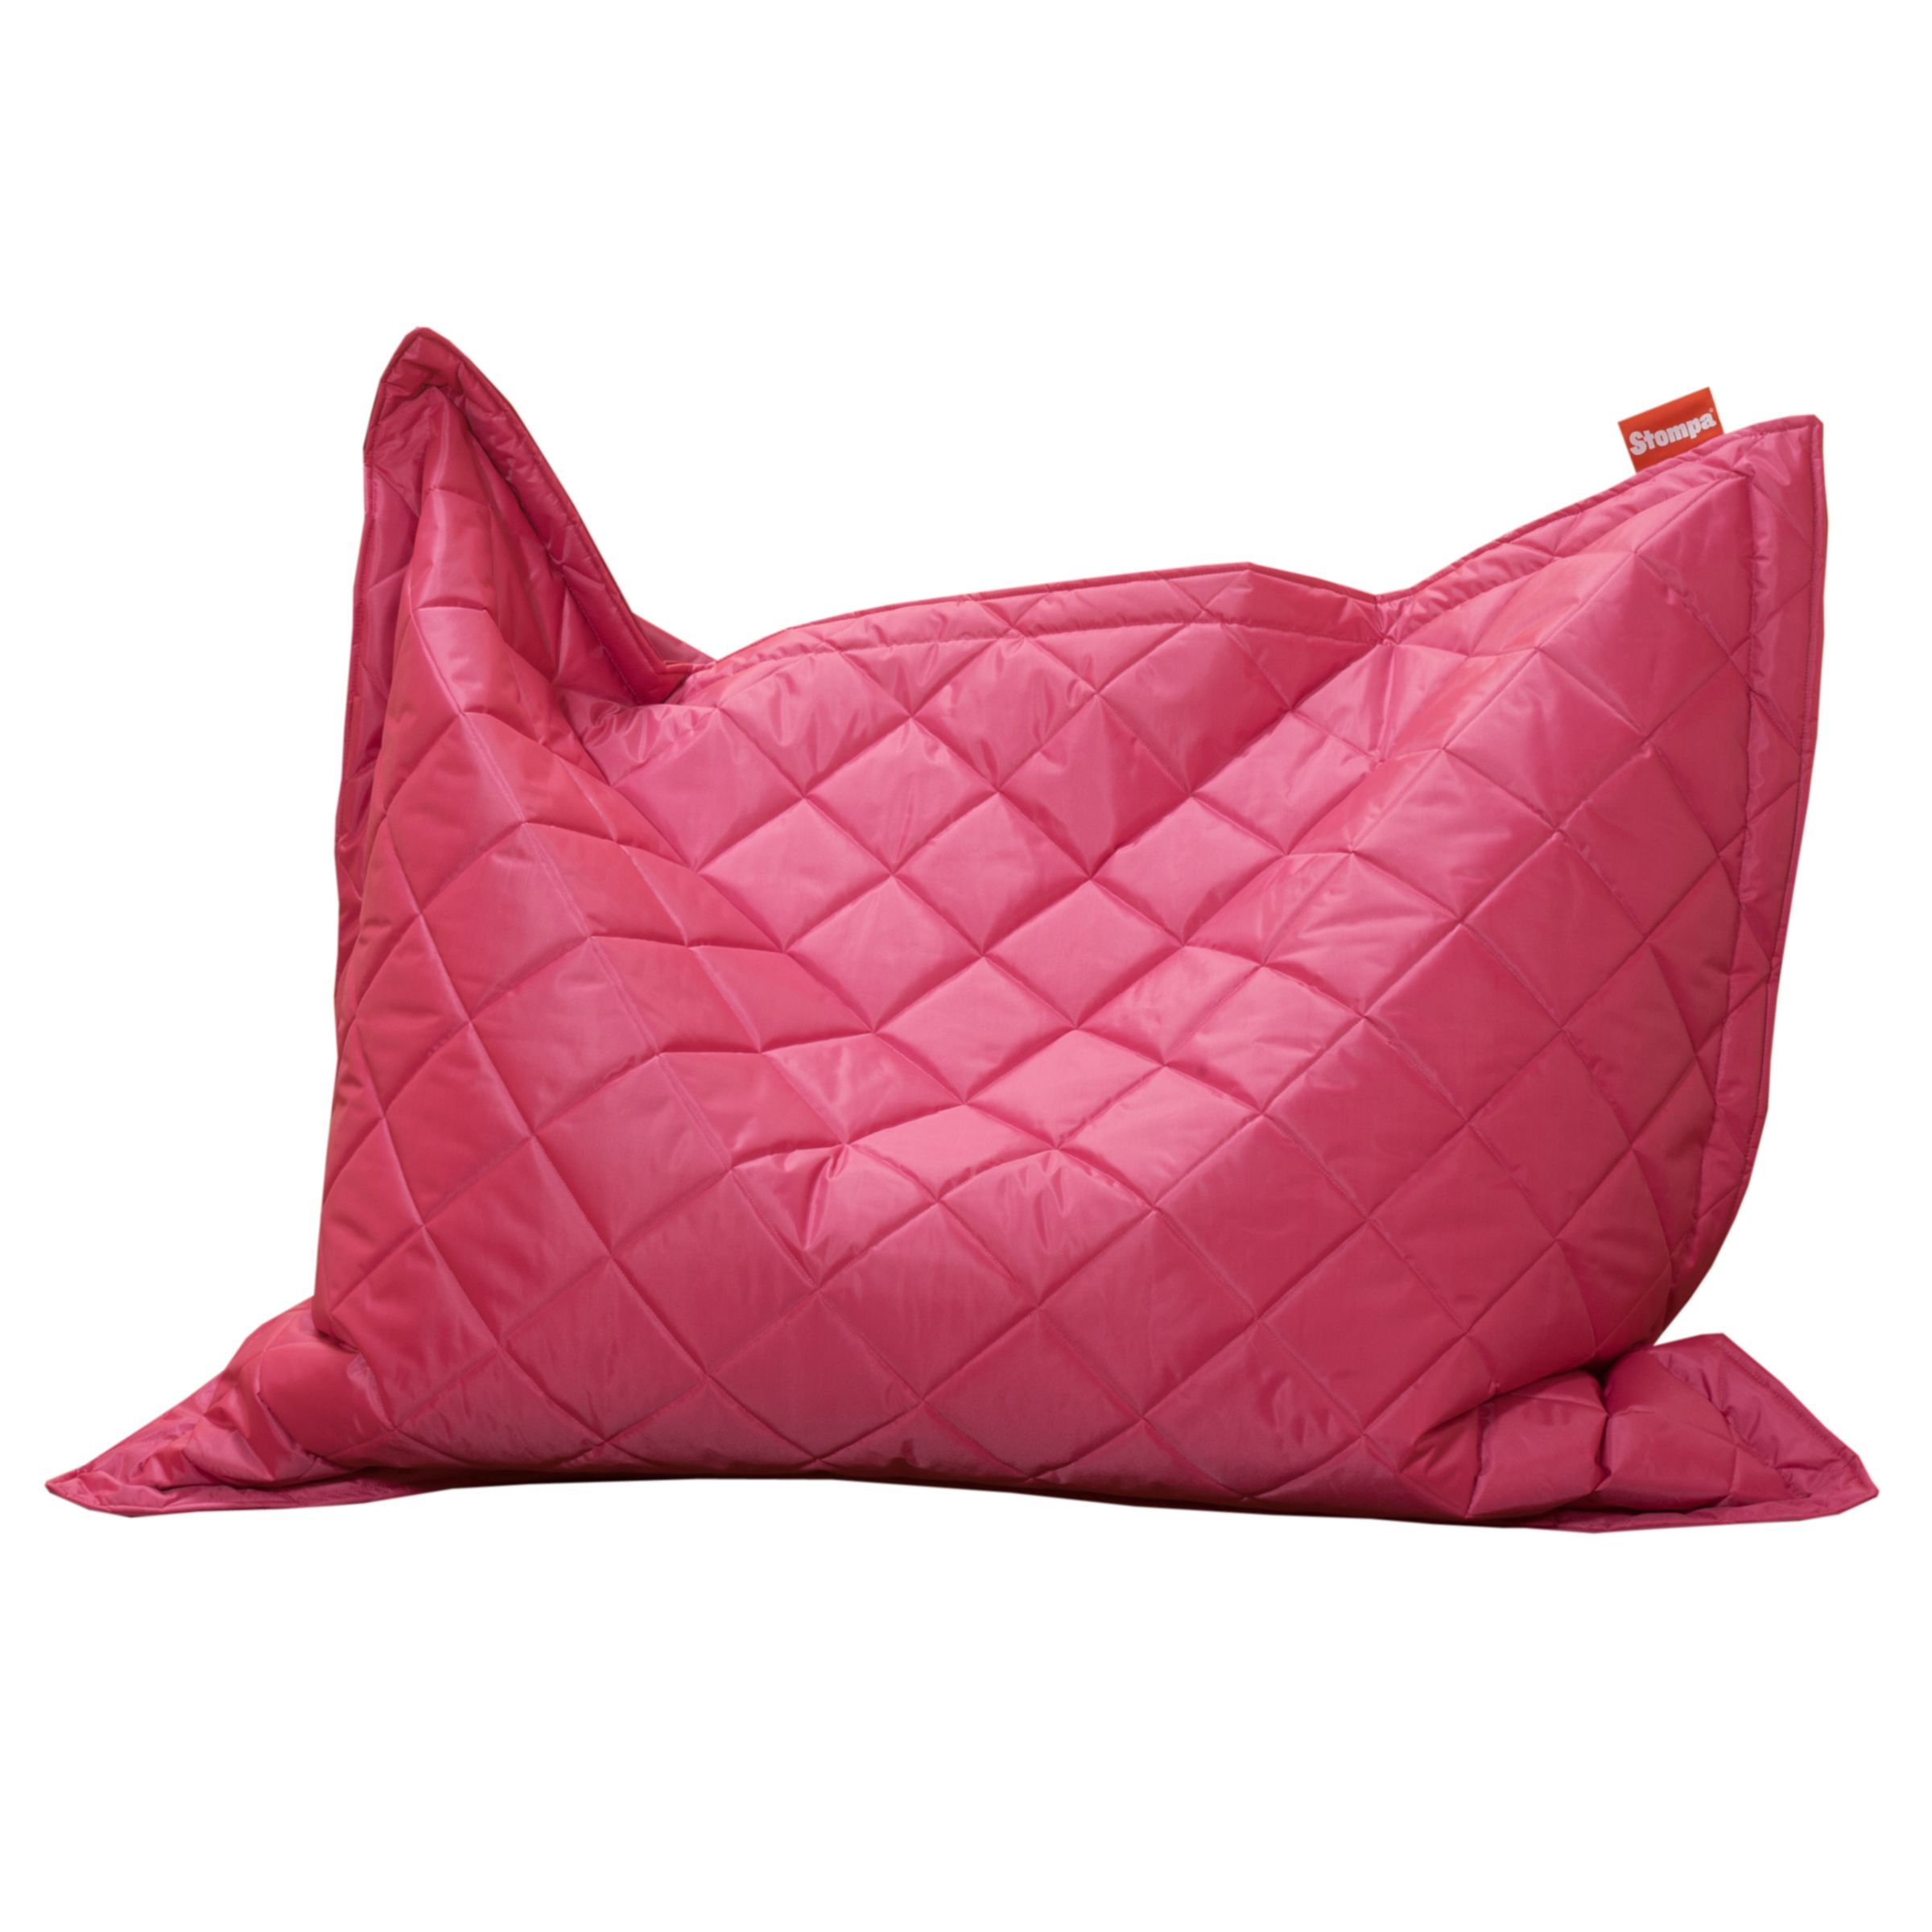 Stompa Uno S Plus Quilted Bean Bag